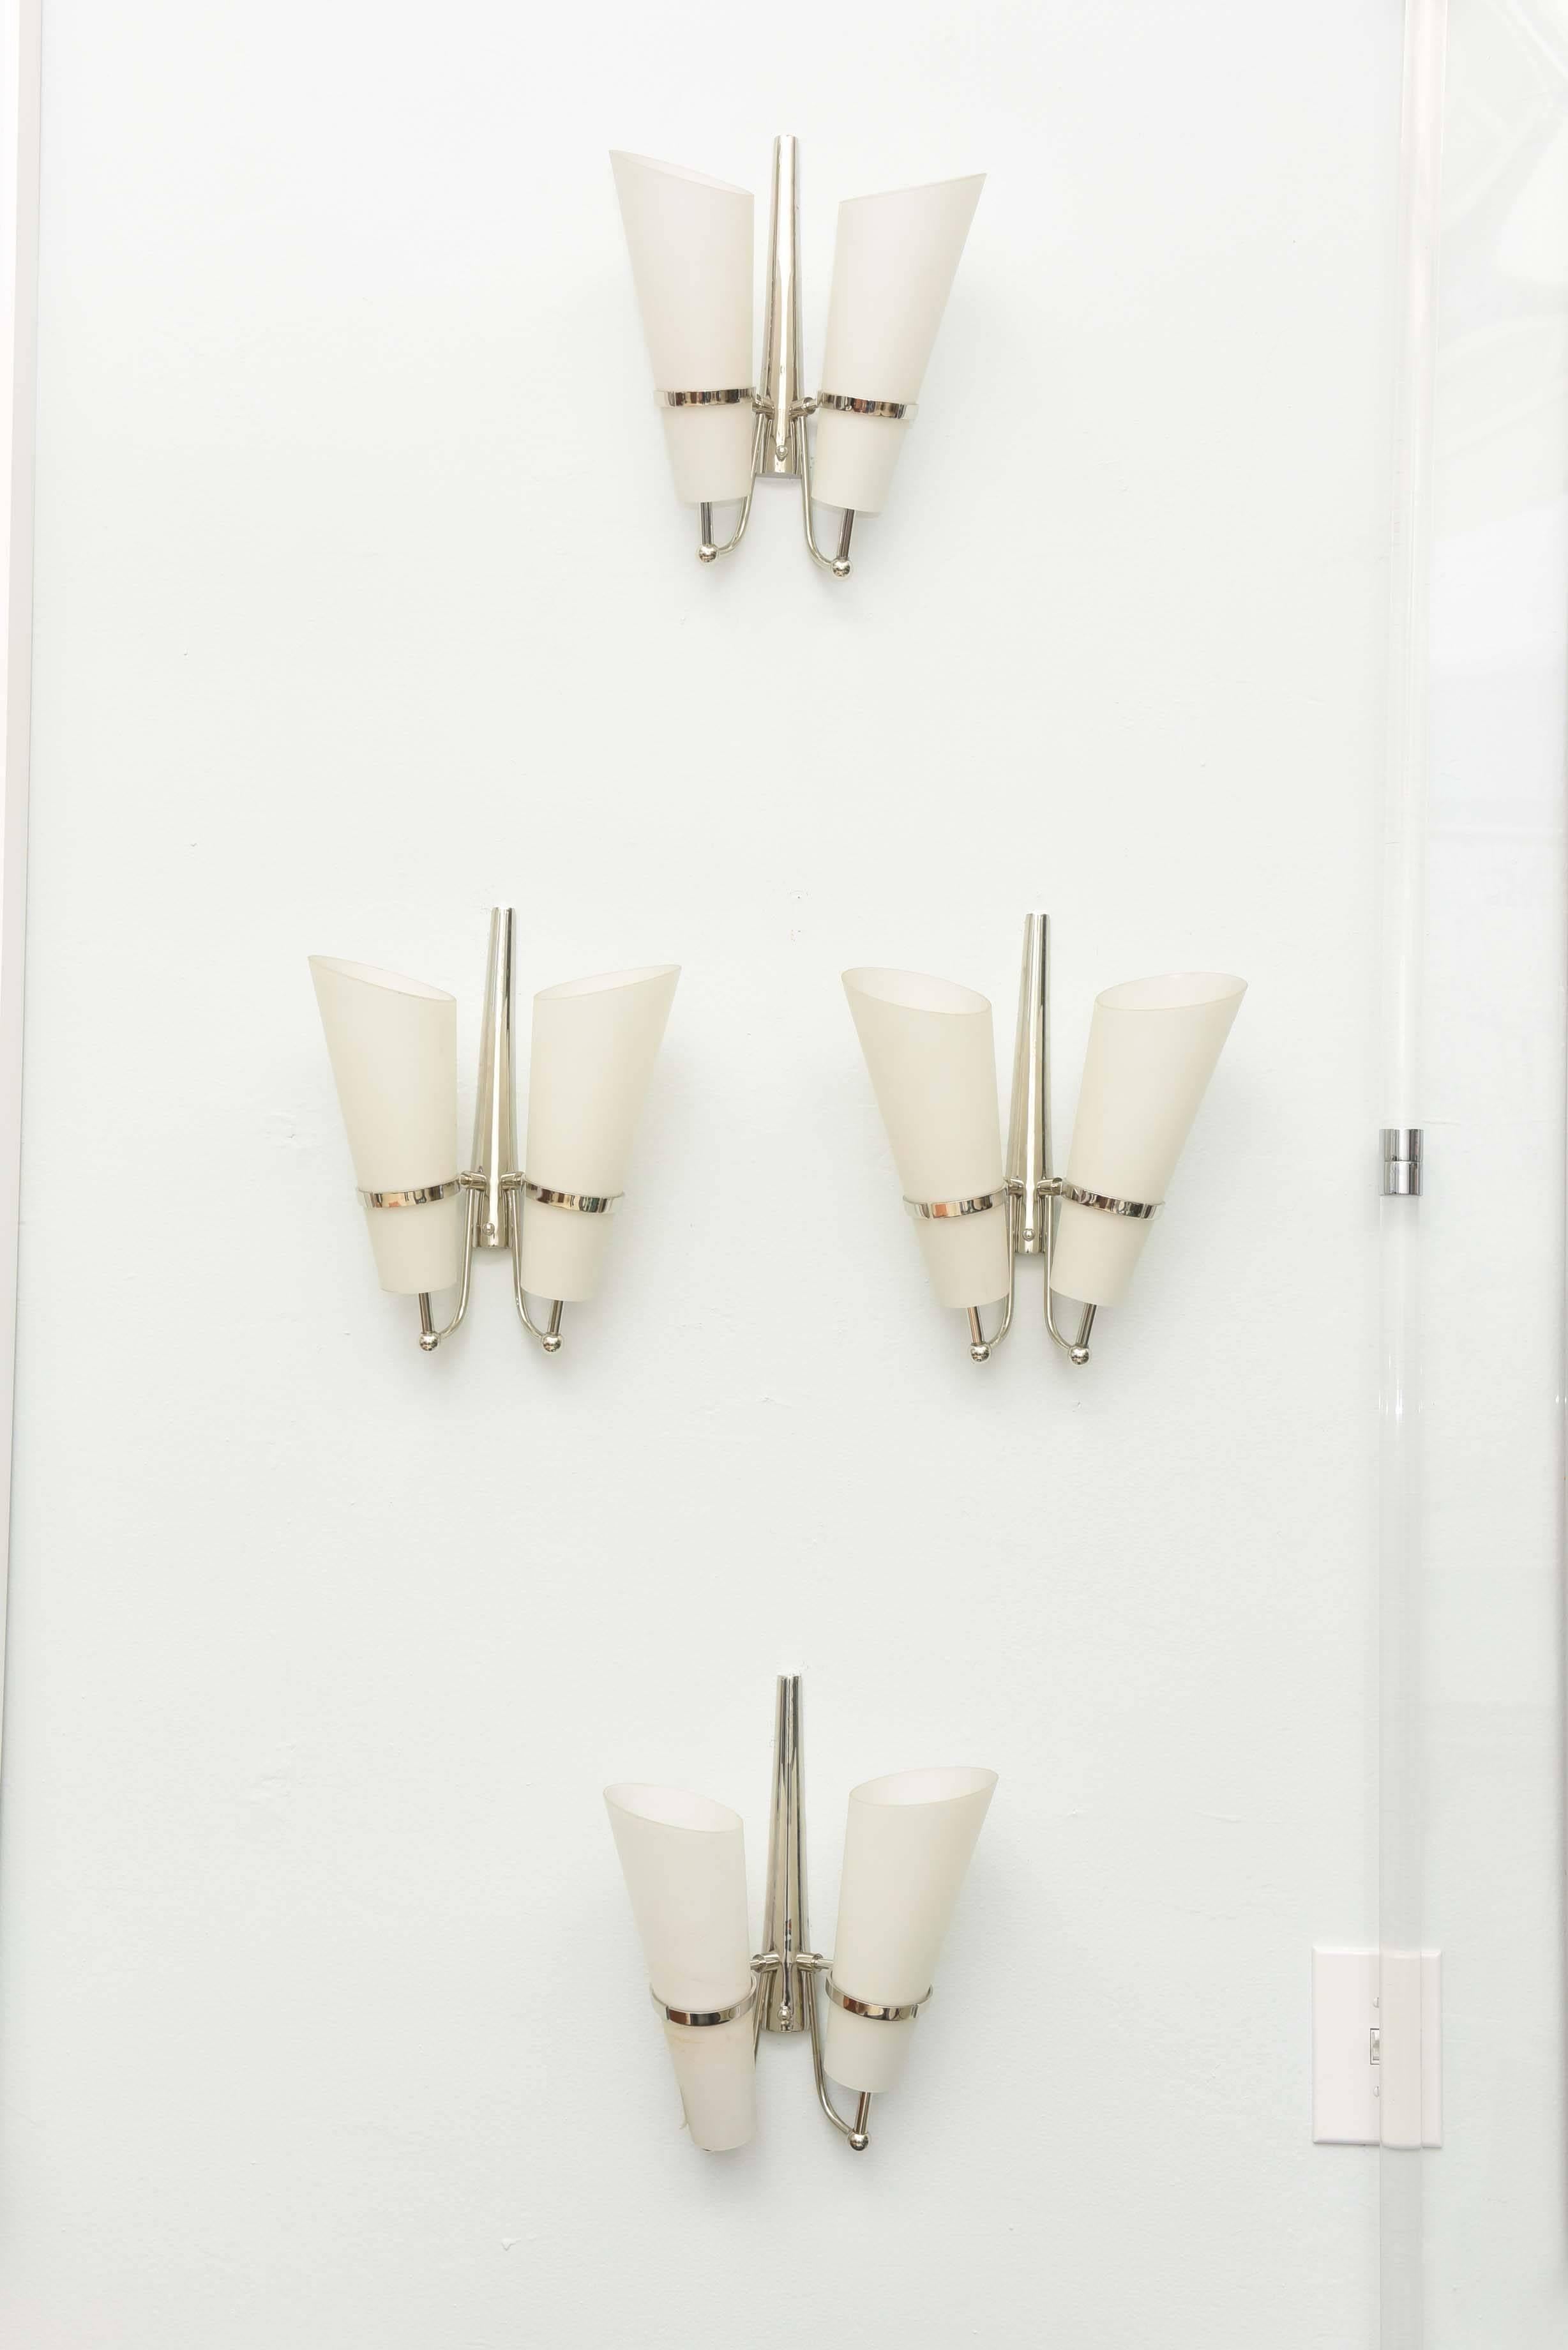 The nickel frame with ring holders for two frosted glass conical tapering shades.